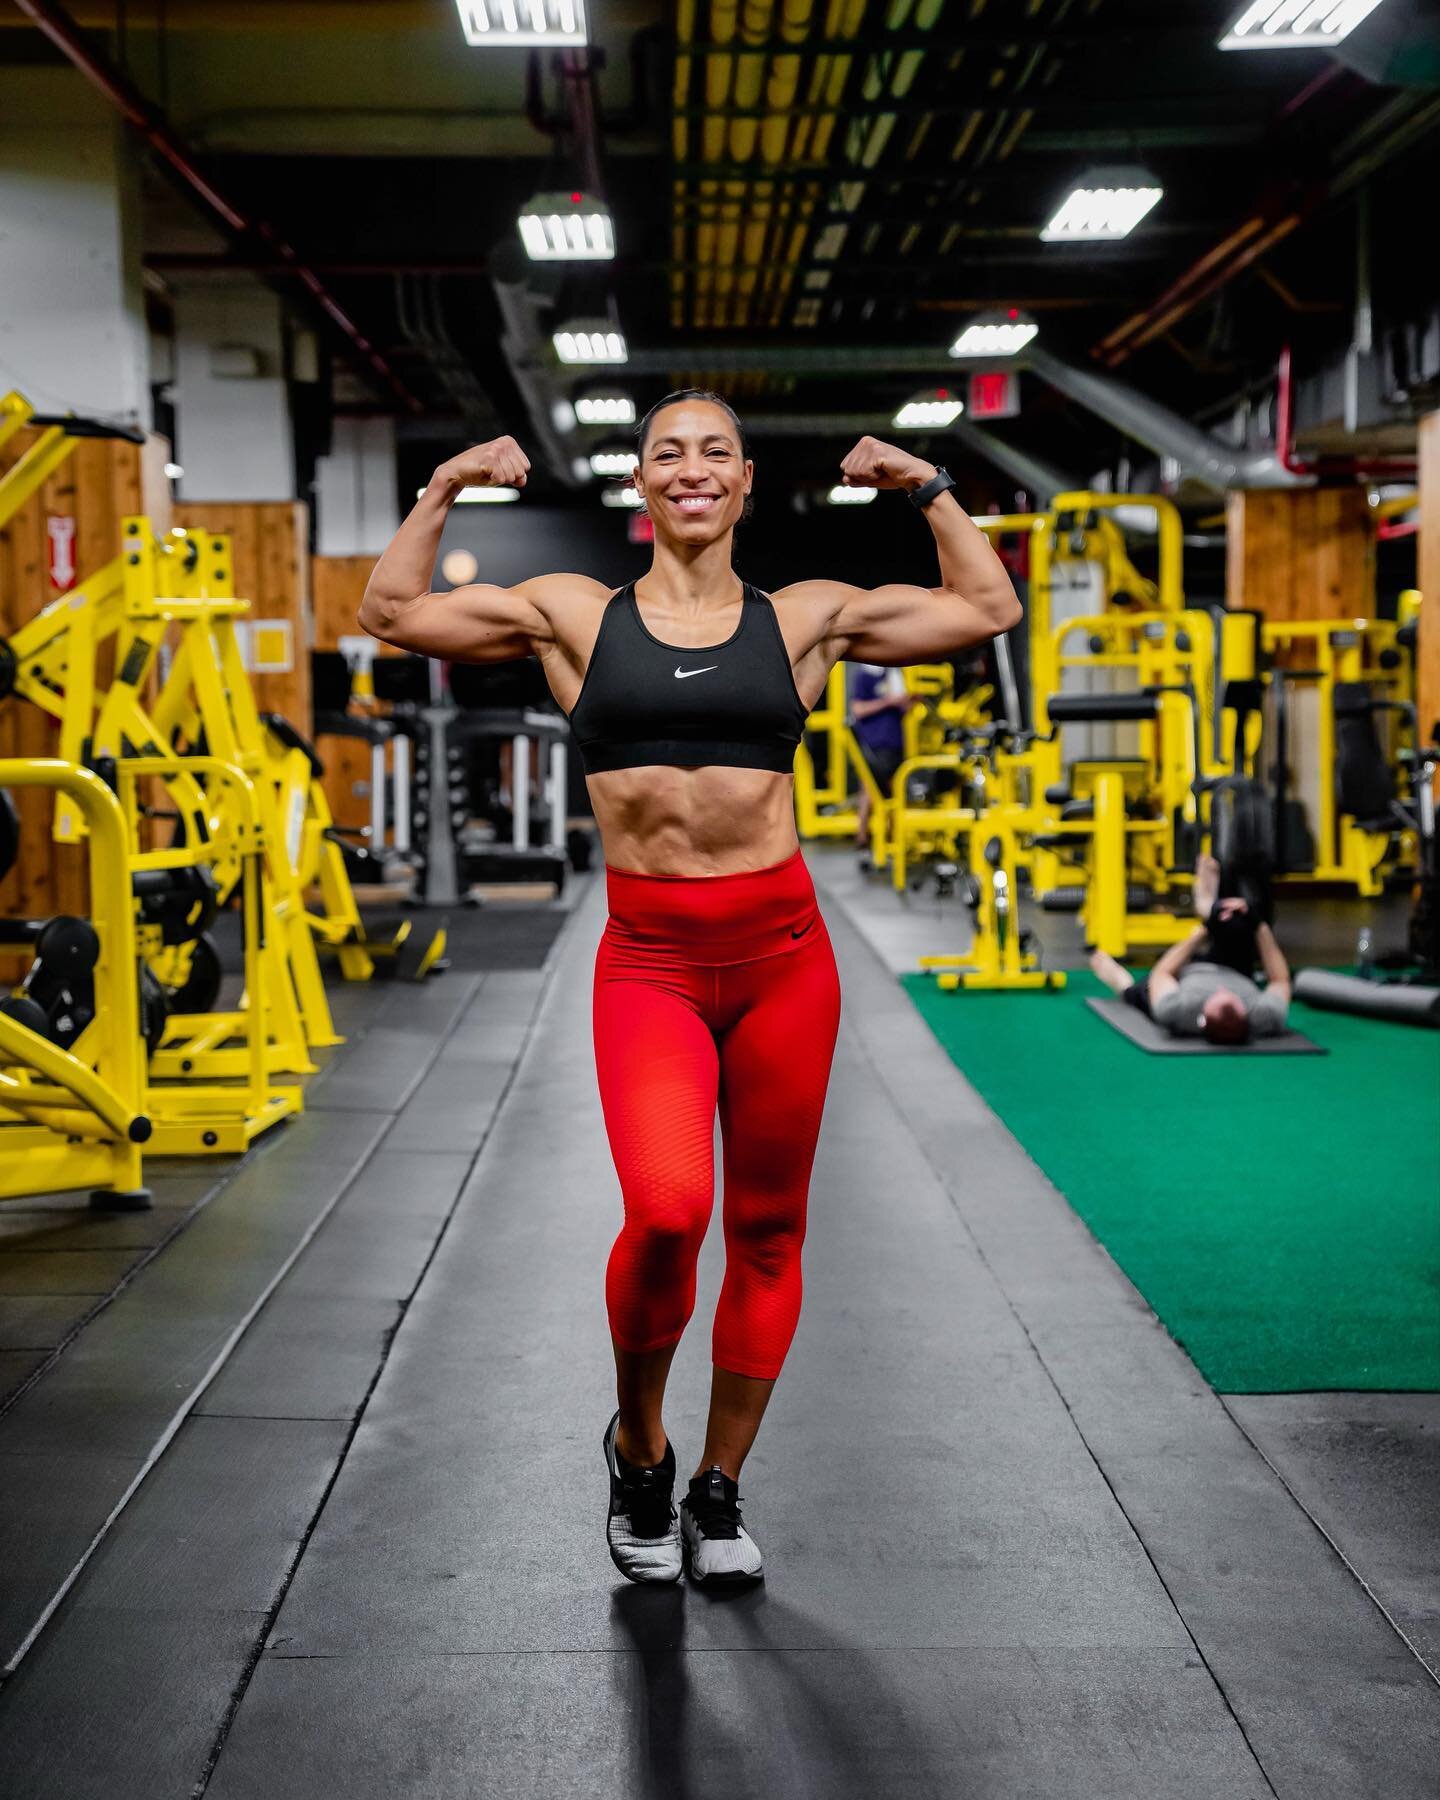 It&rsquo;s Monday&hellip; let the gains begin 💪🏽

#fitnessmotivation 
#fitover40 
#fitmom 
#healthylifestyle 
#moveyourbody 
#eathealthy 
#stayhydrated 
#sleepwell 
#crossfit

📸 @kingcurated